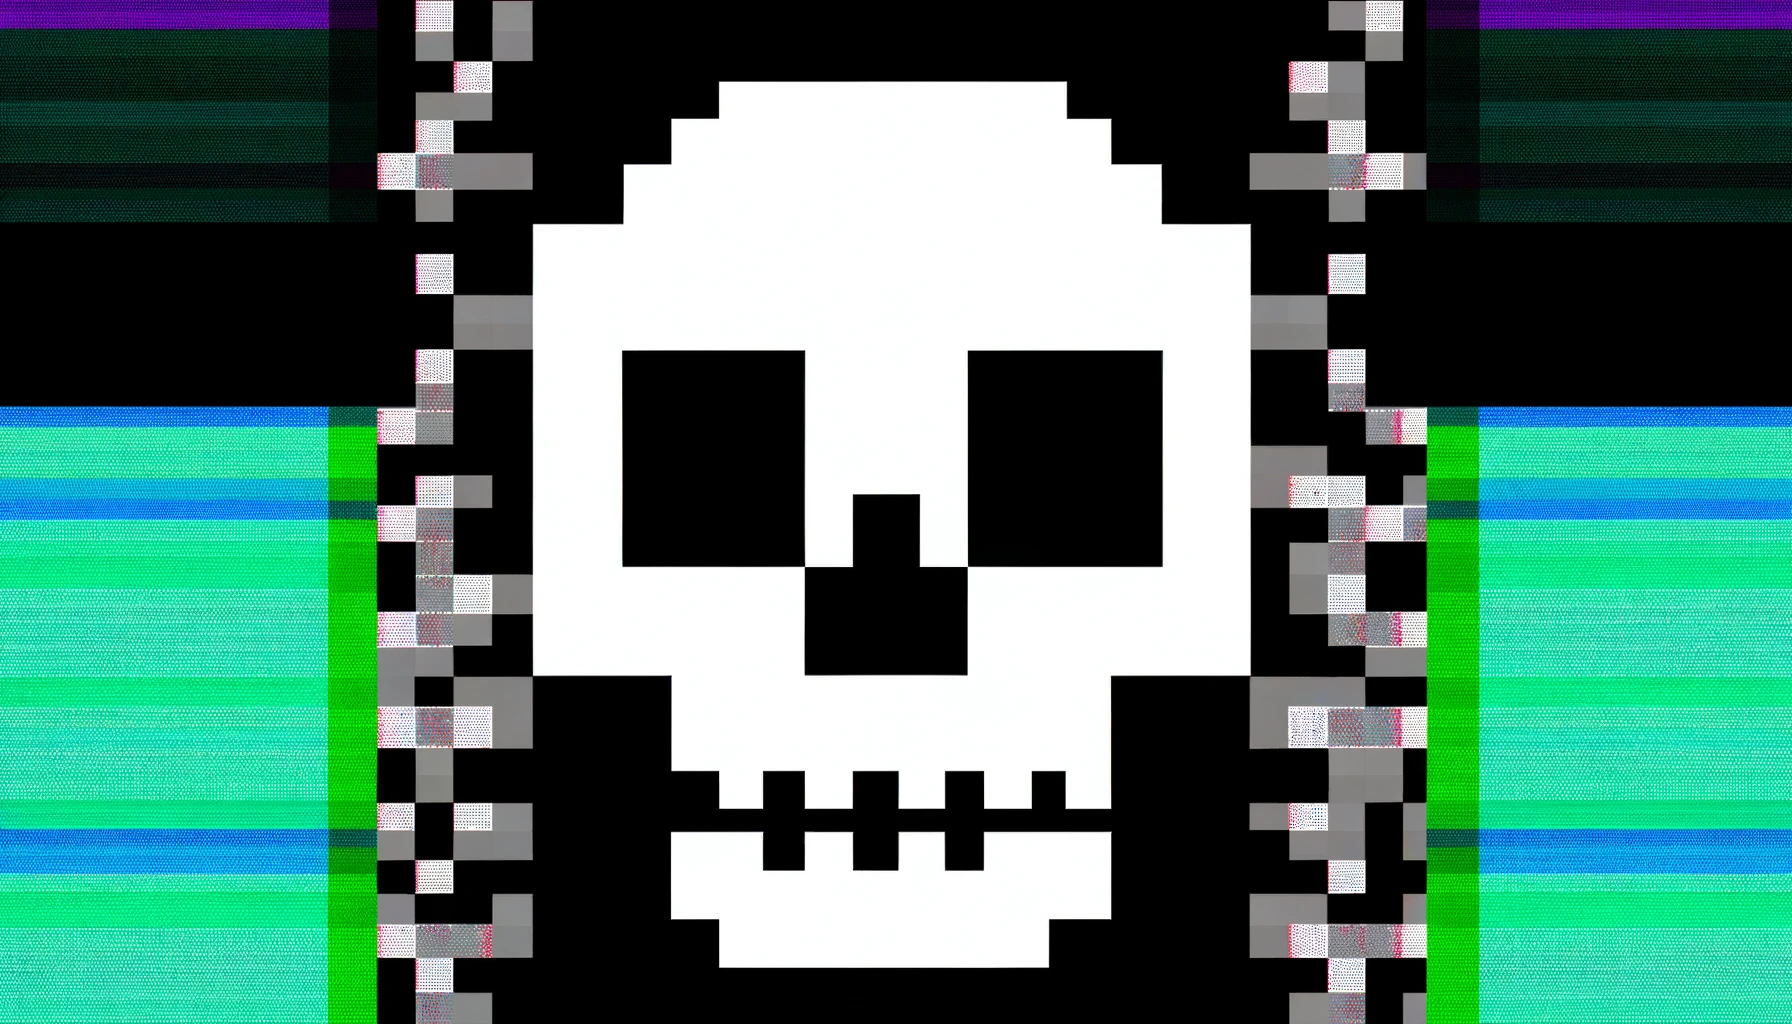 A pixelated skull graphic is centered on a black background, with horizontal bands of vibrant colors intersecting the image, simulating a visual glitch. The colors — light gray, dark gray, bright red, yellow, and blue — appear in sharp, fragmented lines that give the impression of the image being momentarily disrupted by digital interference. The pattern of gray crosses is subtly visible in the background, further adding to the glitch effect. This digital distortion suggests that the skull image is experiencing a moment of digital decay, reminiscent of static interference on an old television screen.